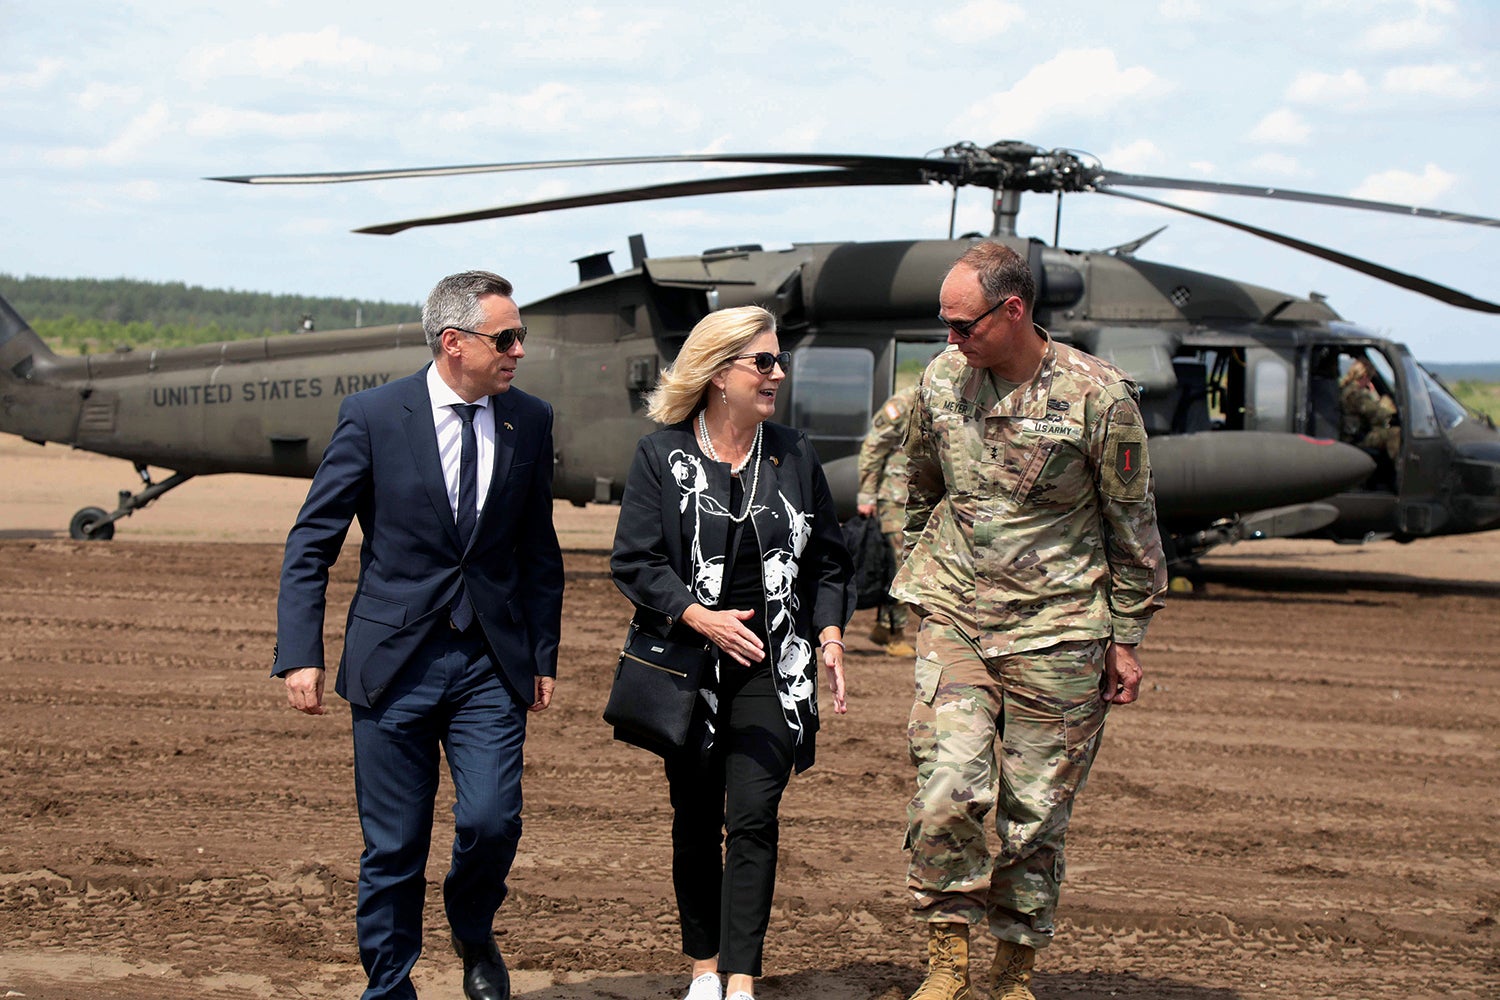 Secretary of the Army Christine Wormuth visits troops deployed to Riga, Latvia. (Credit: U.S. Army/Staff Sgt. Tae Harrison)